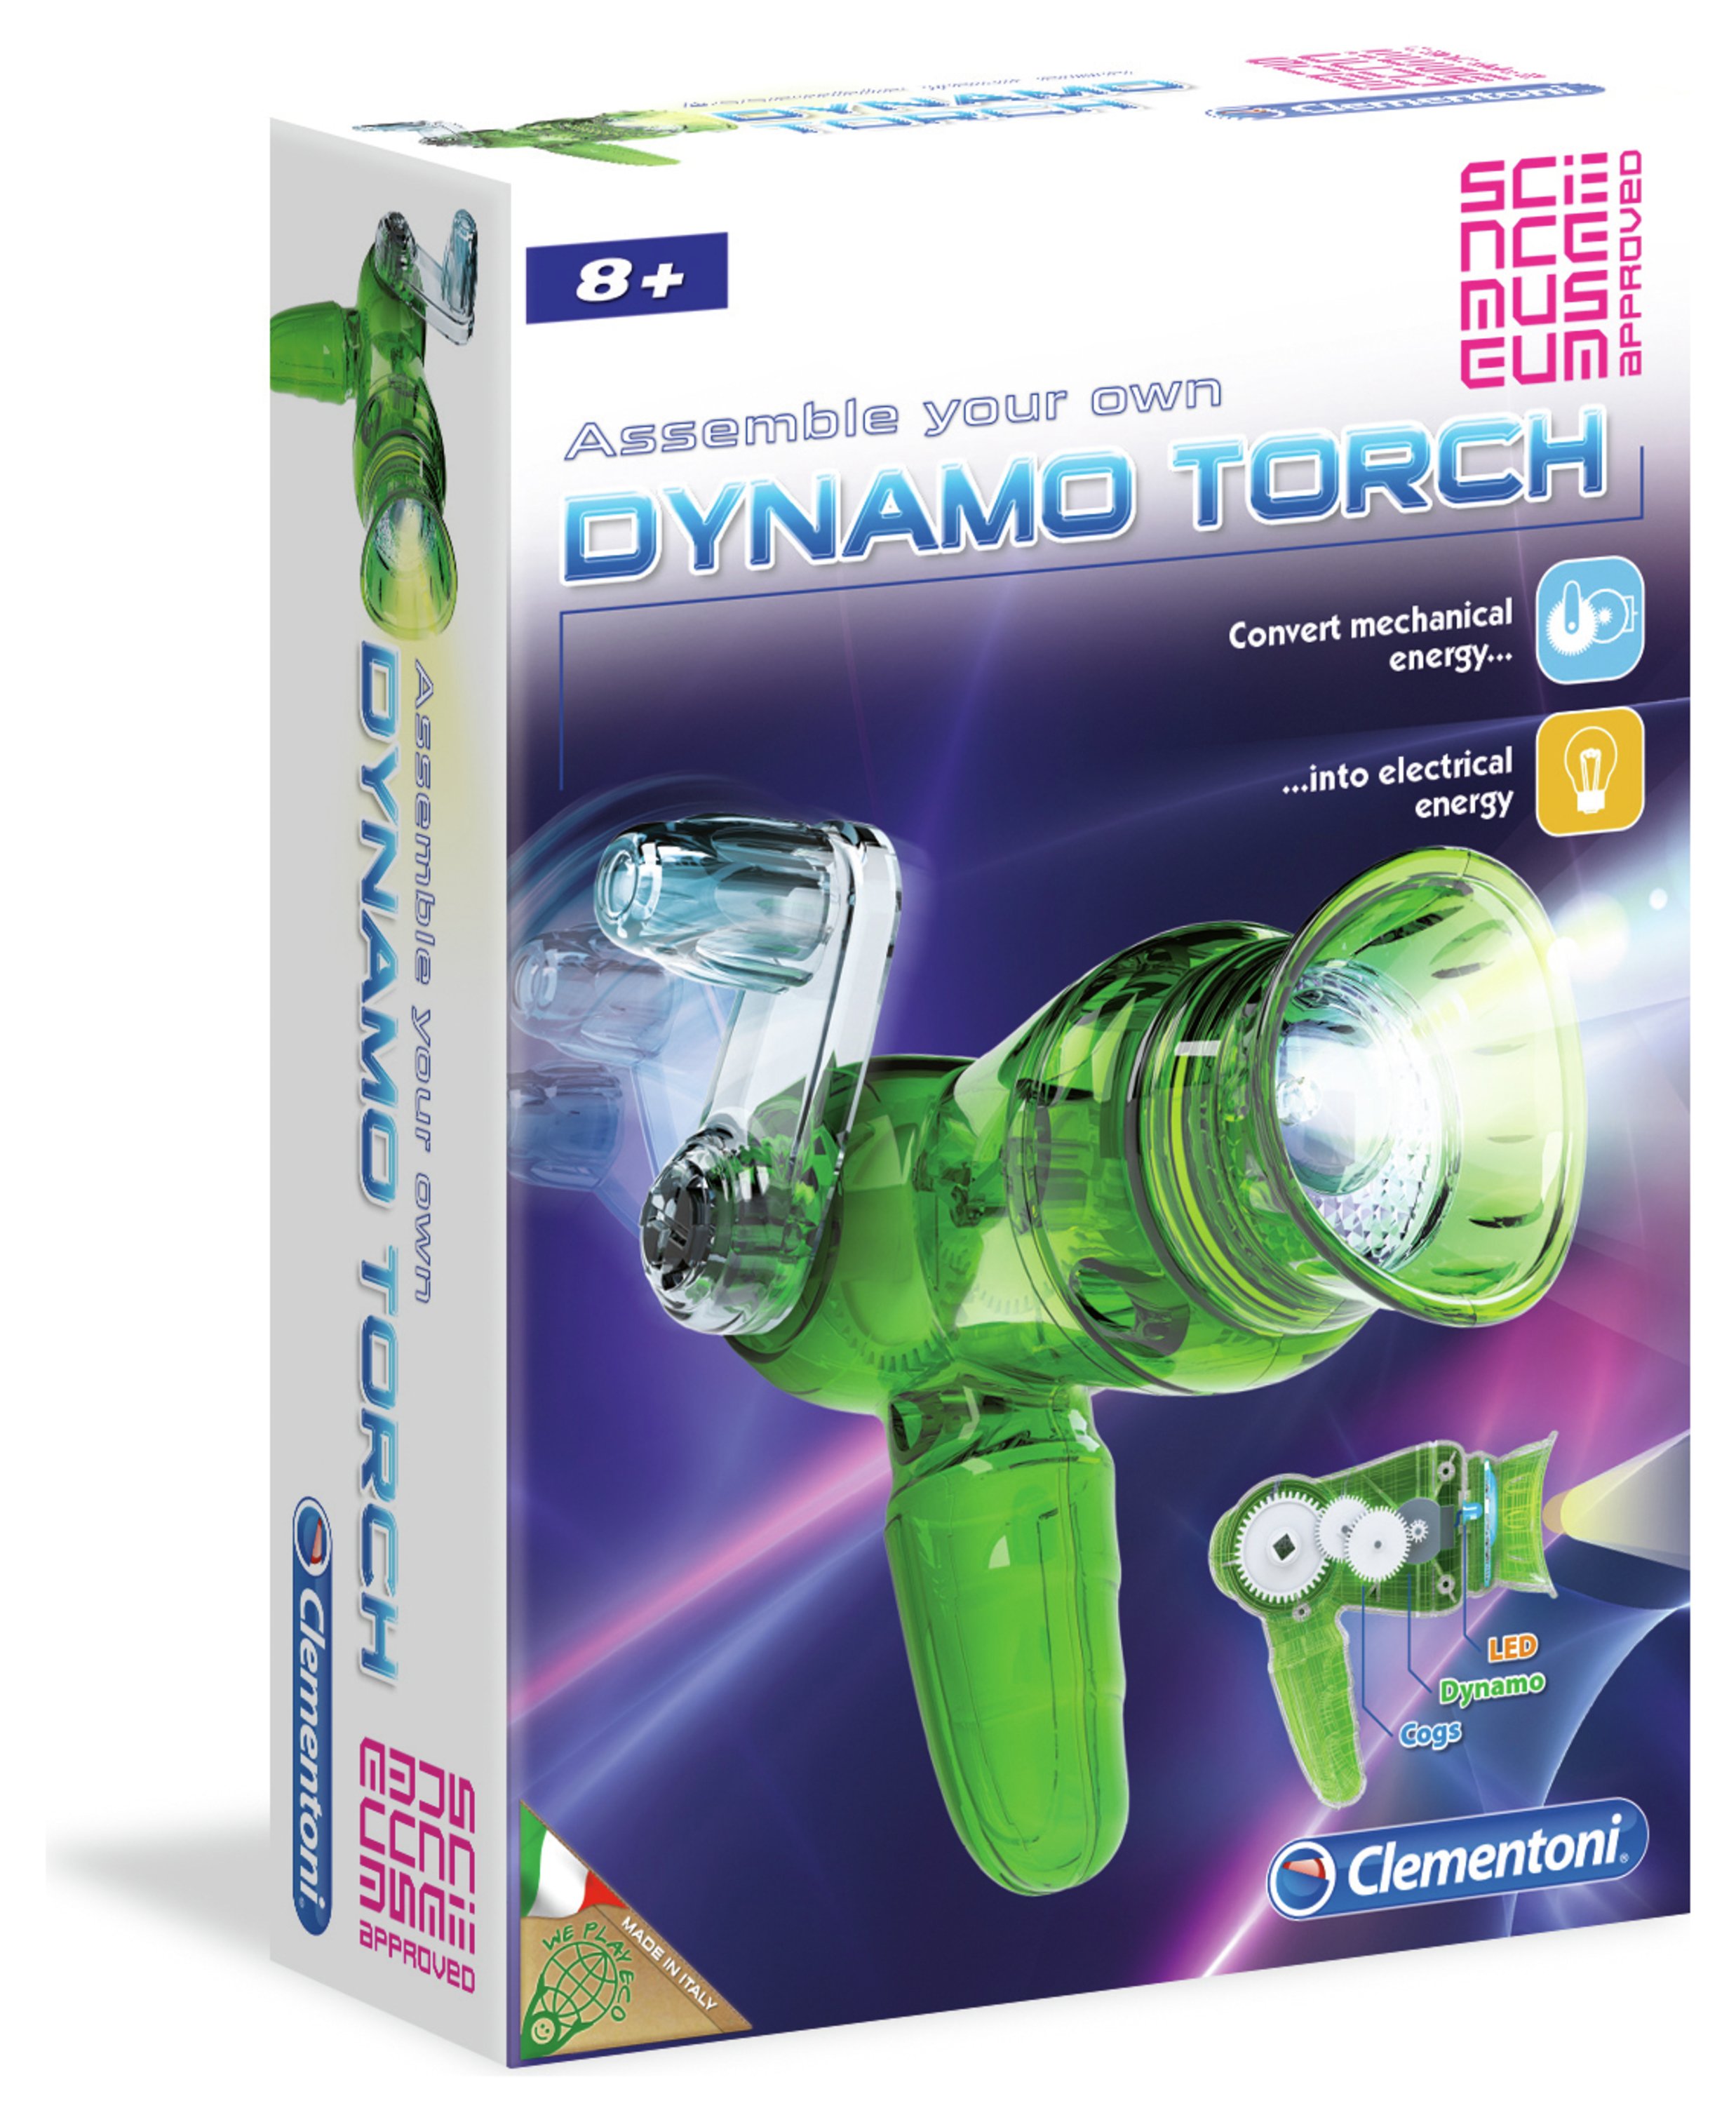 Science Museum Dynamo Torch